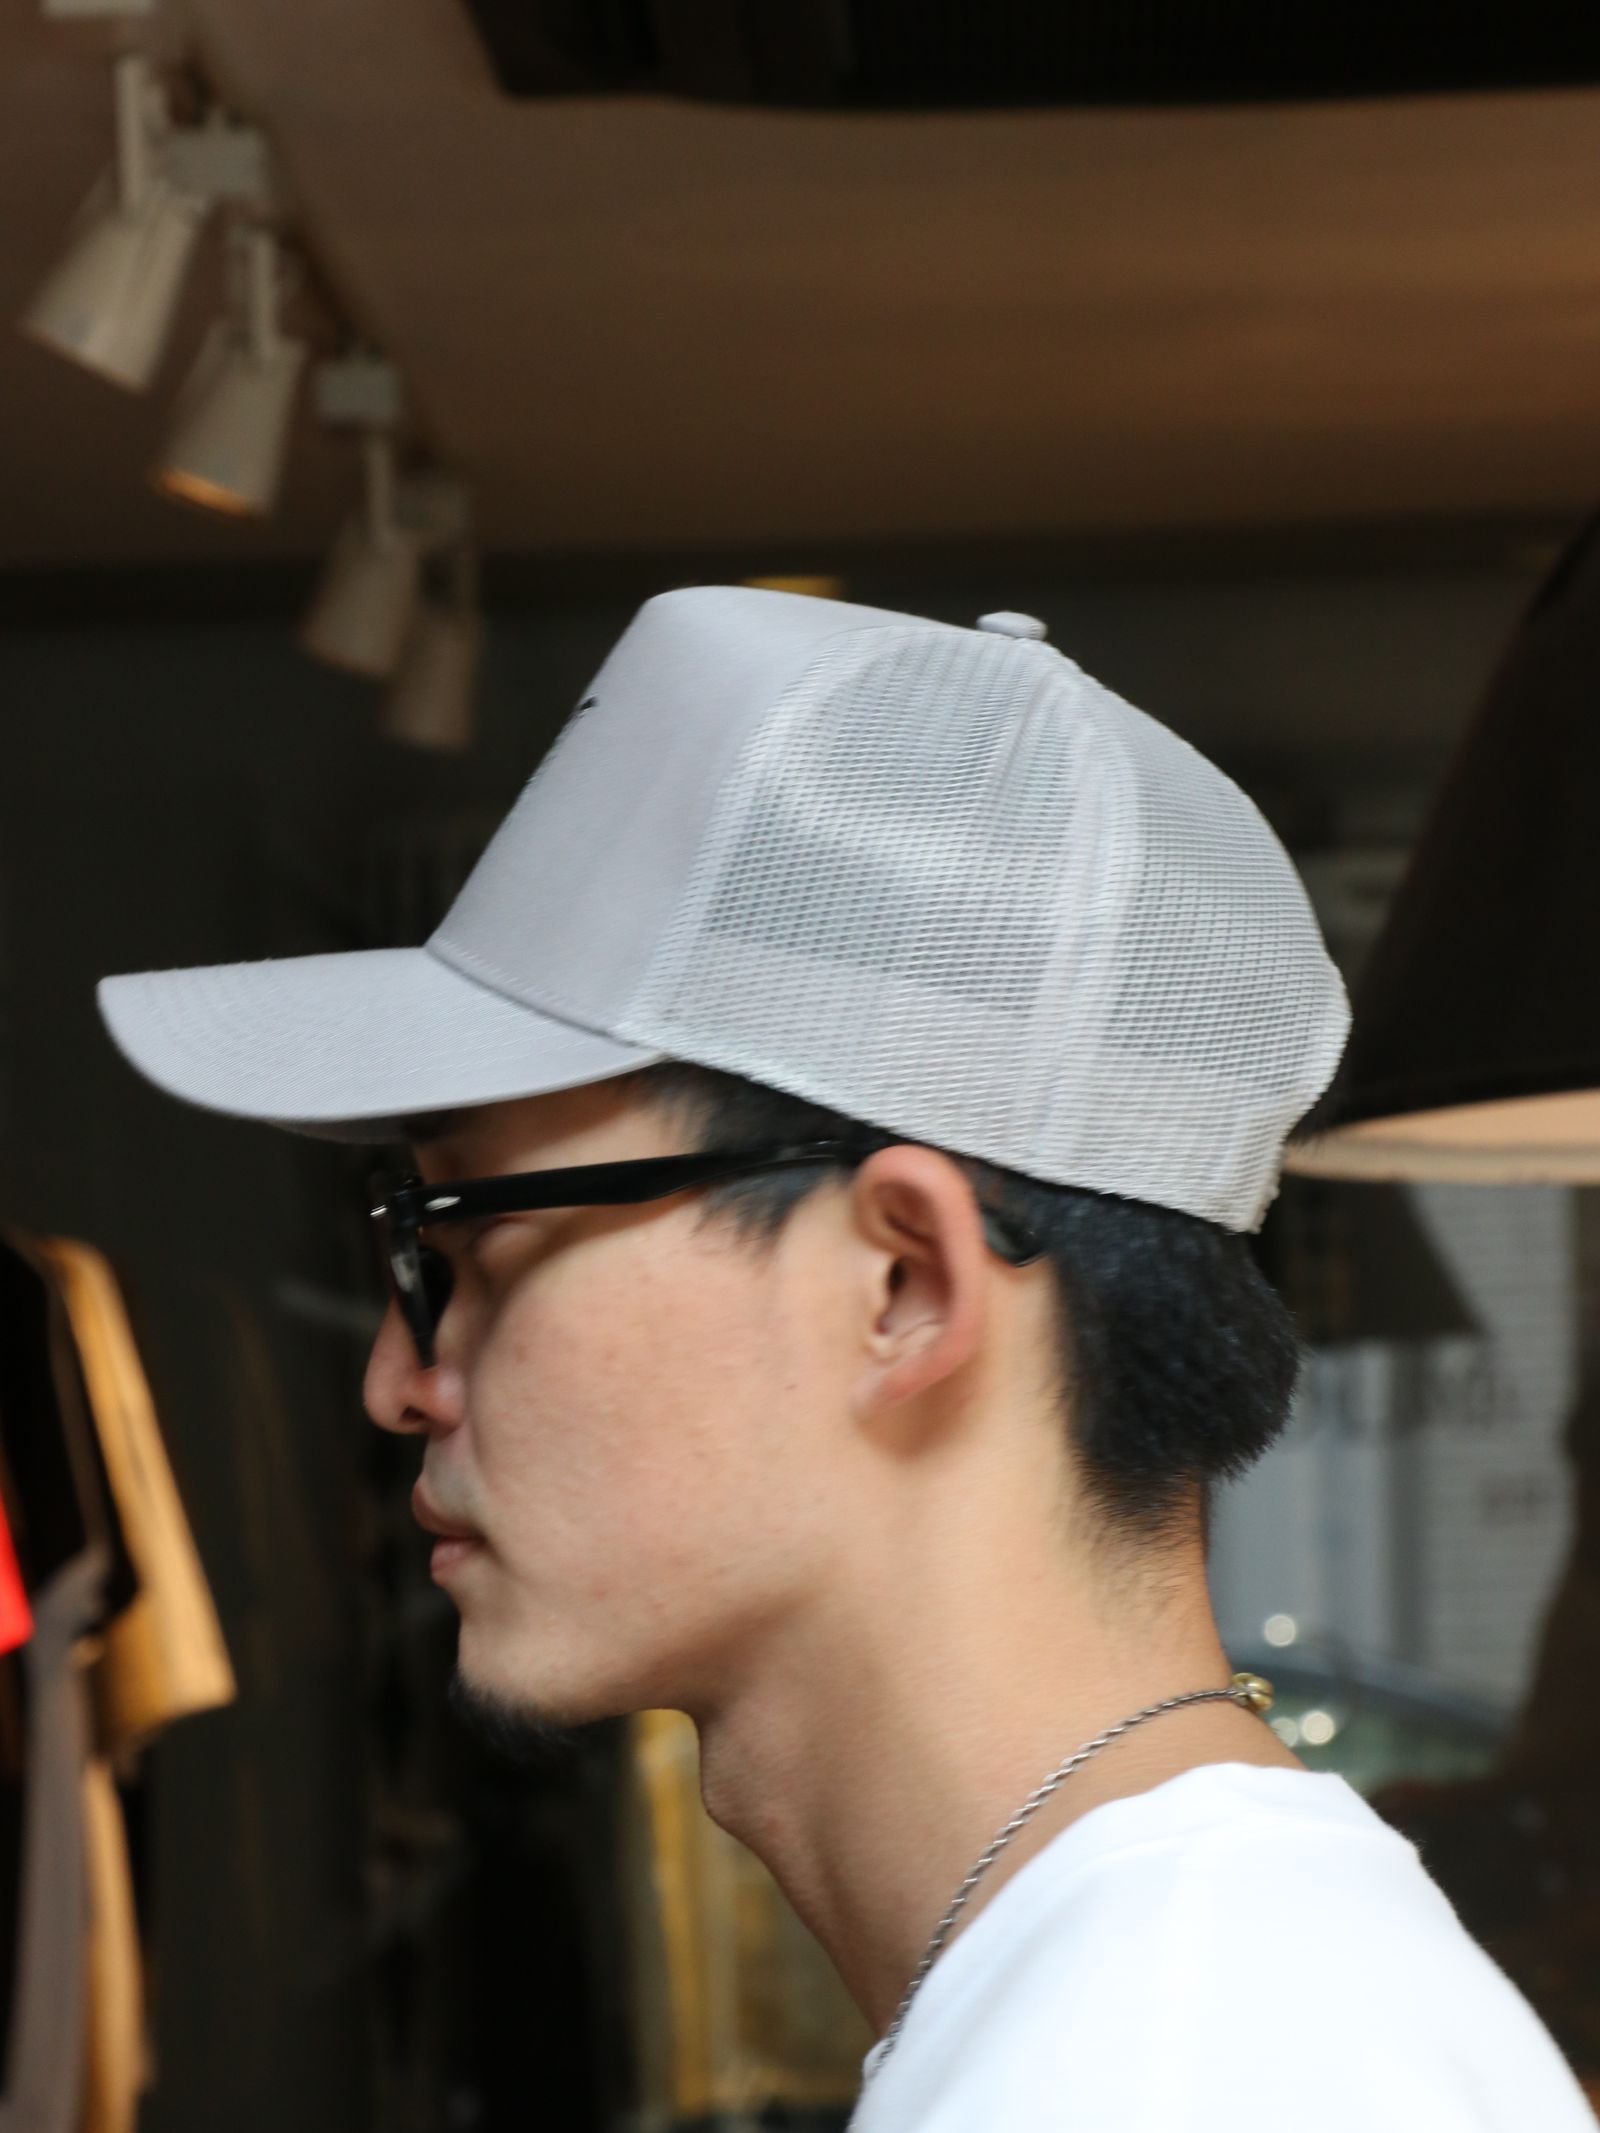 O.L.A.W - NORM ロゴ メッシュキャップ (グレー) / NORM LOGO MESH CAP 